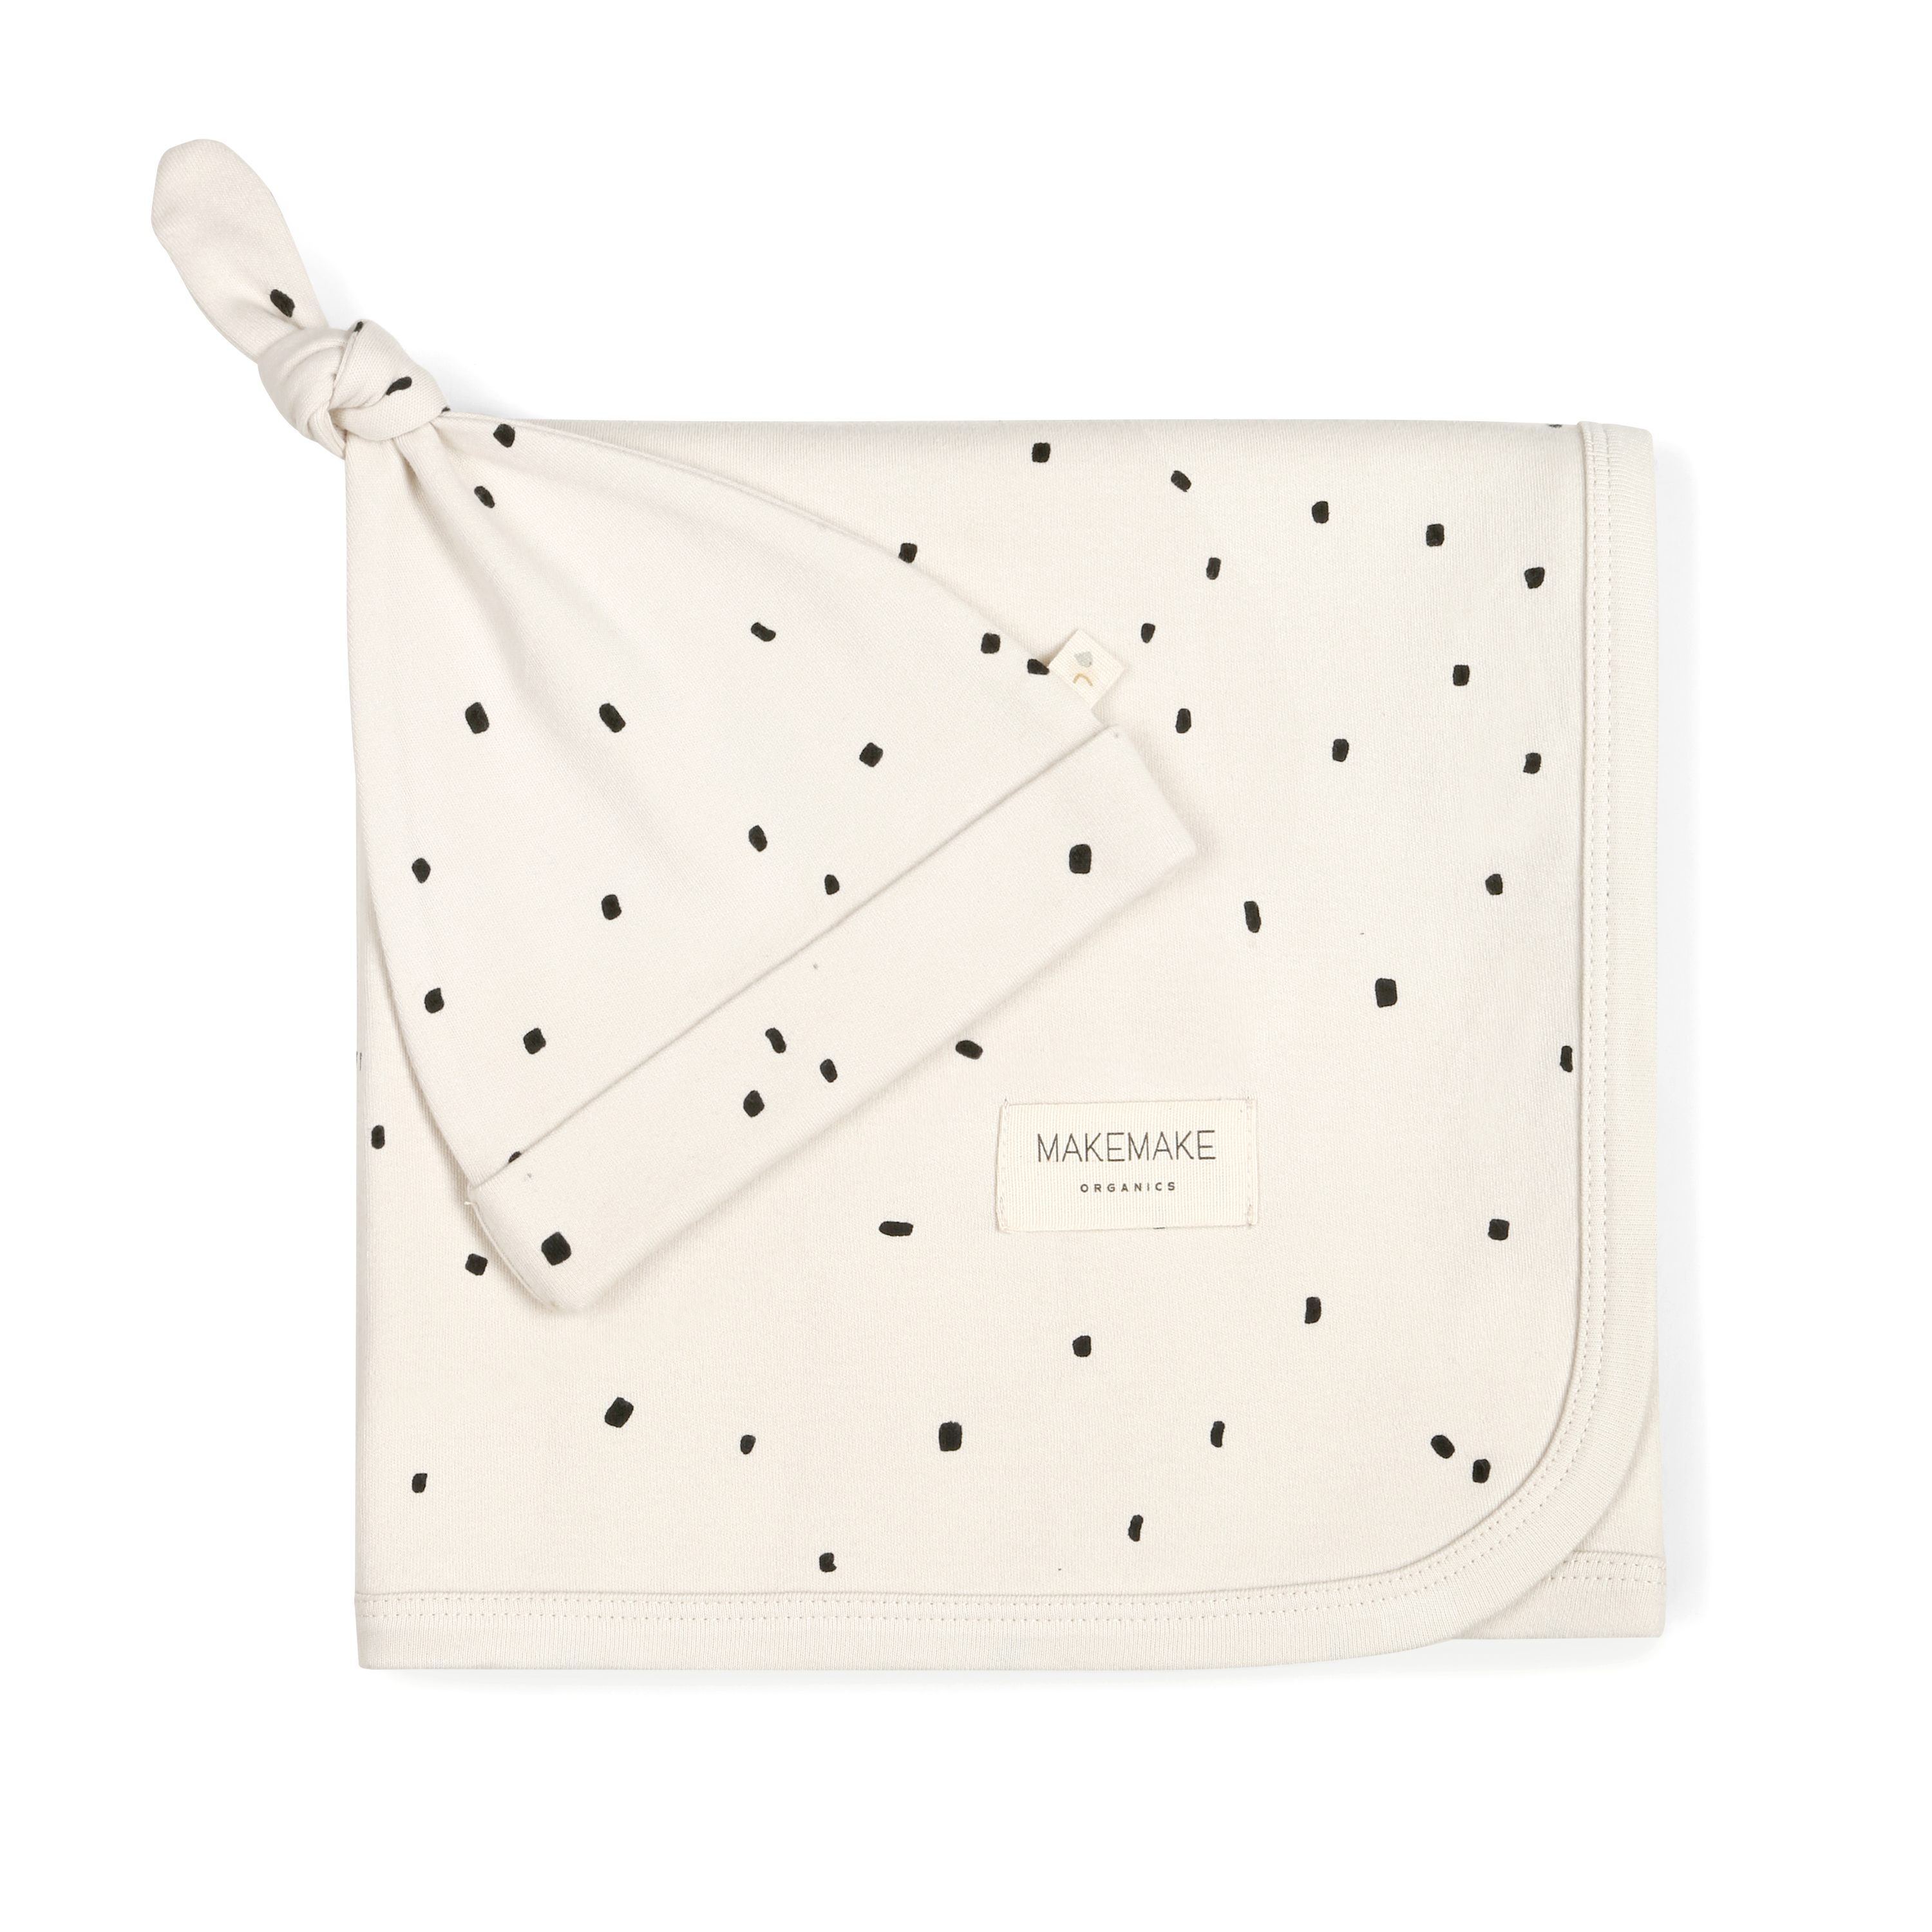 A cream-colored Makemake Organics swaddle blanket & hat neatly folded on a white background, decorated with a scattered black dot pattern, featuring a small visible logo.